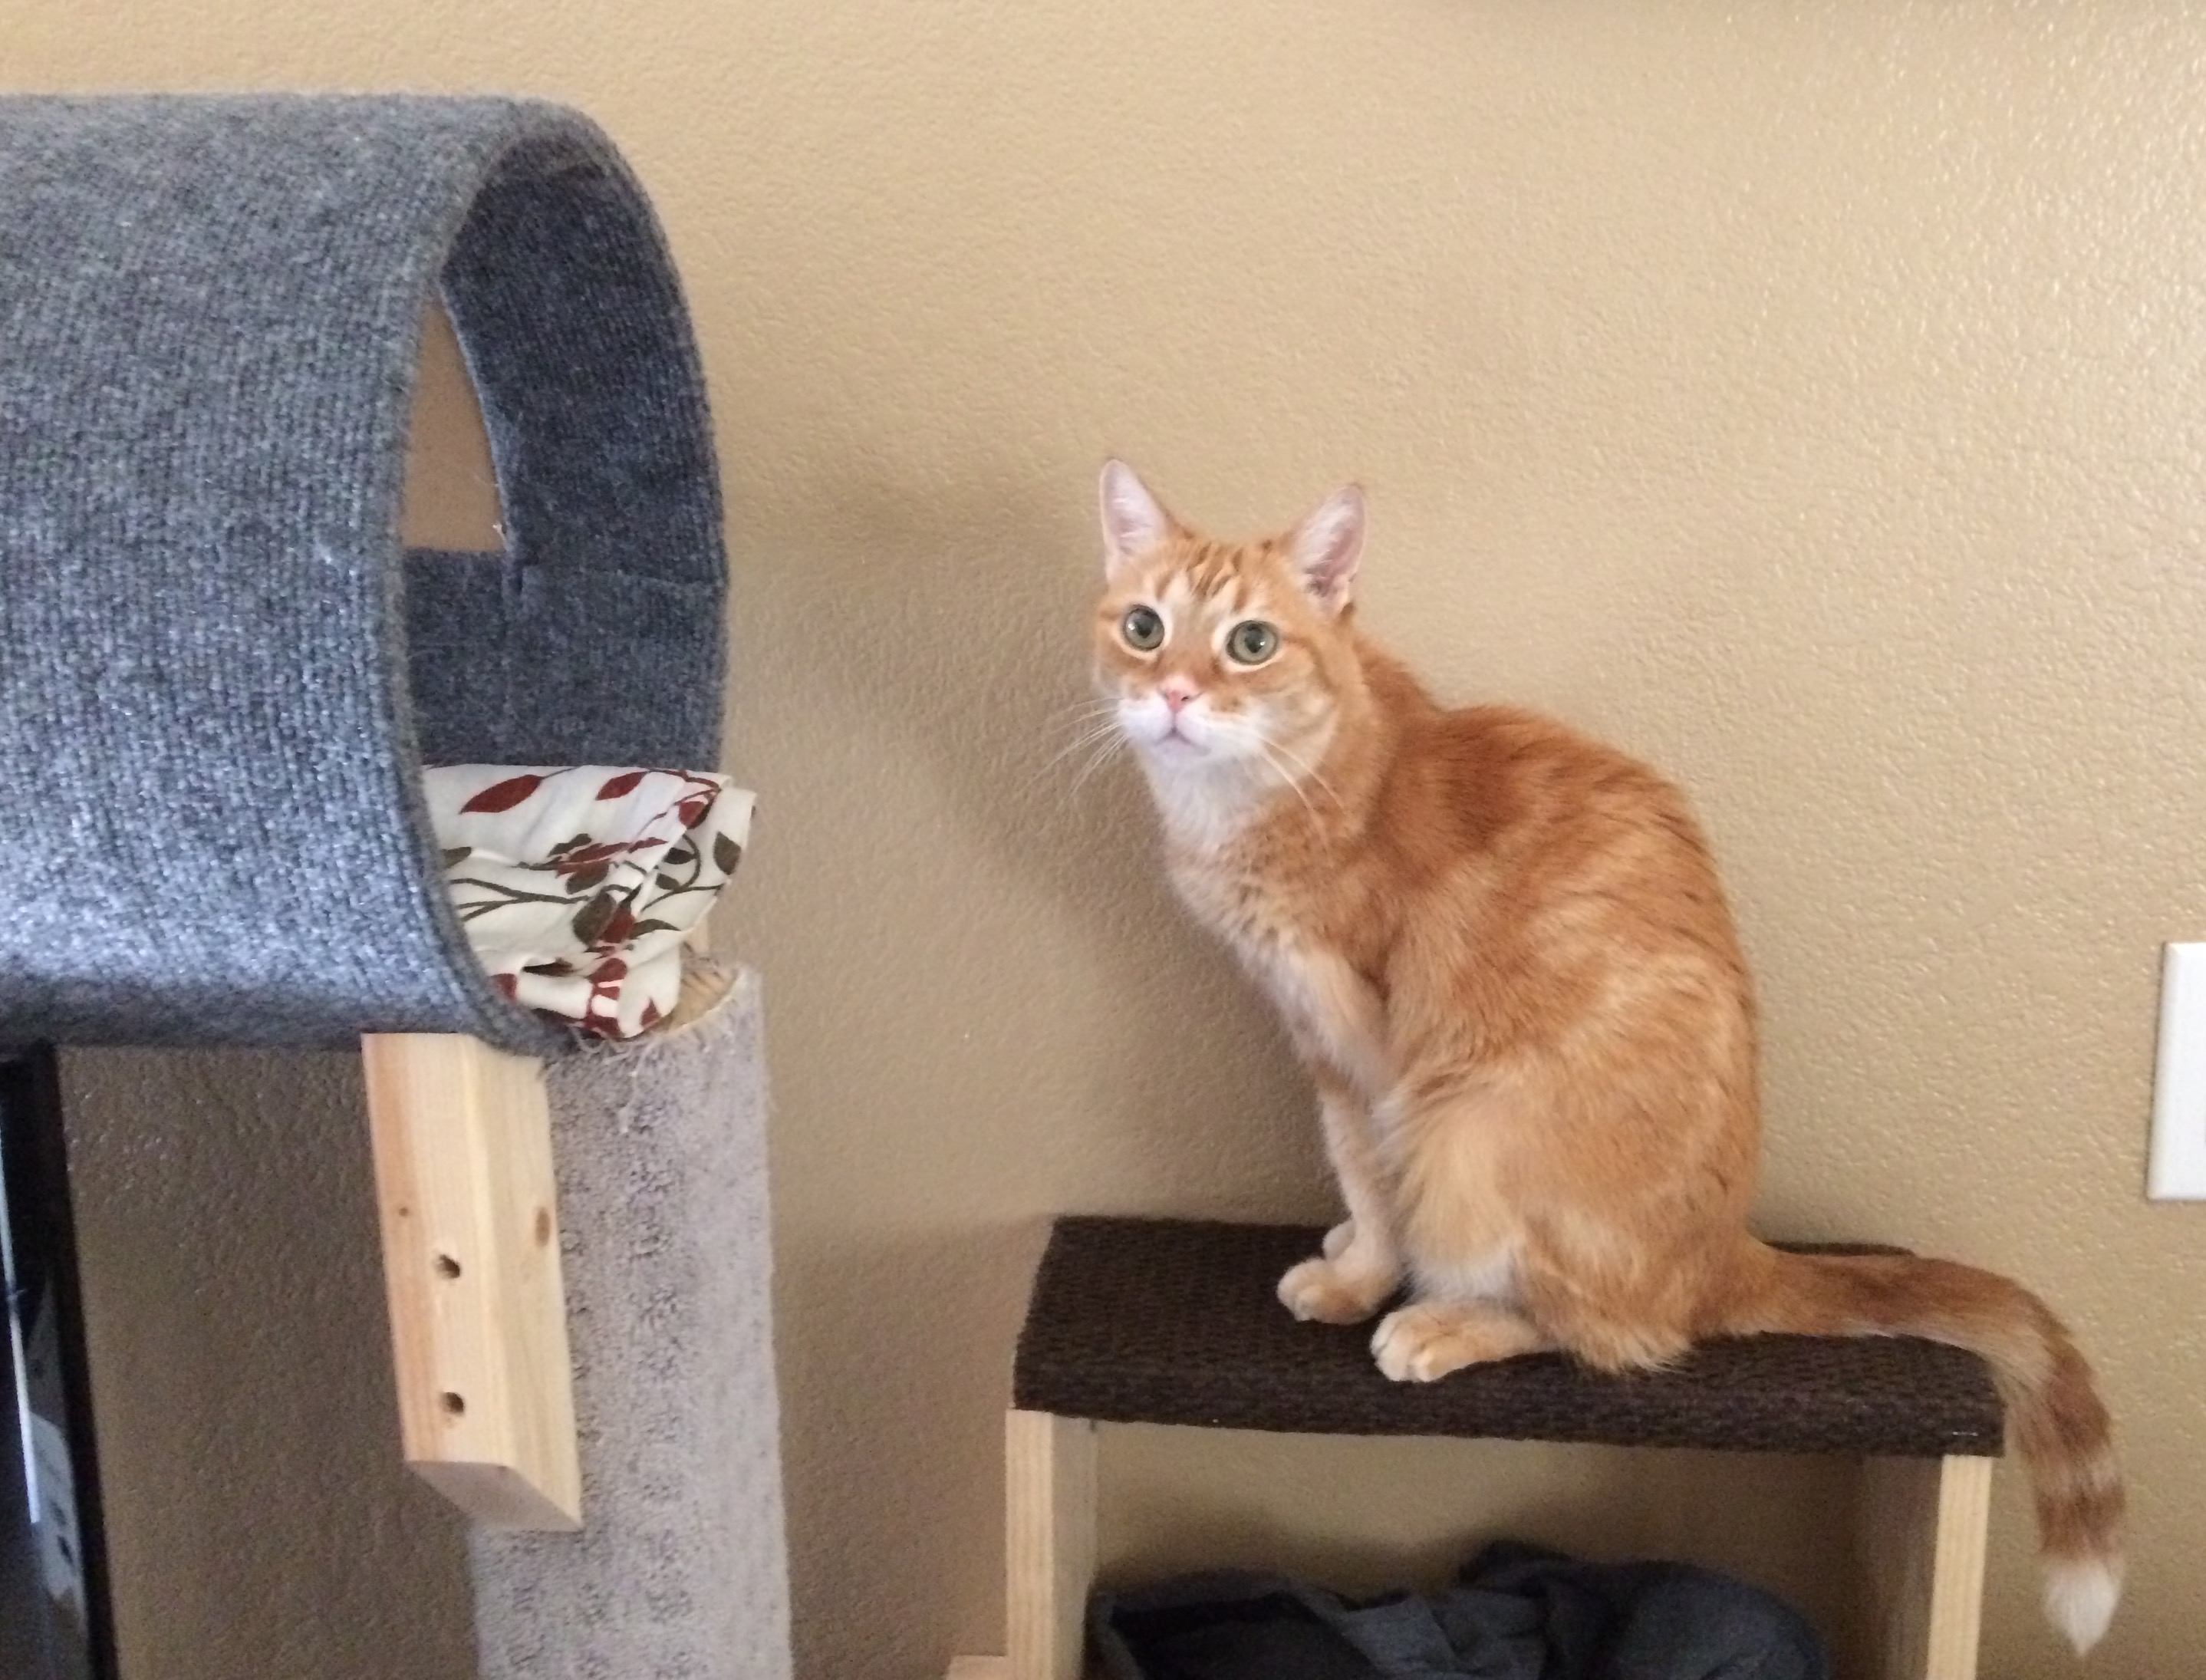 An orange tabby sitting on a step above the back of a chair.